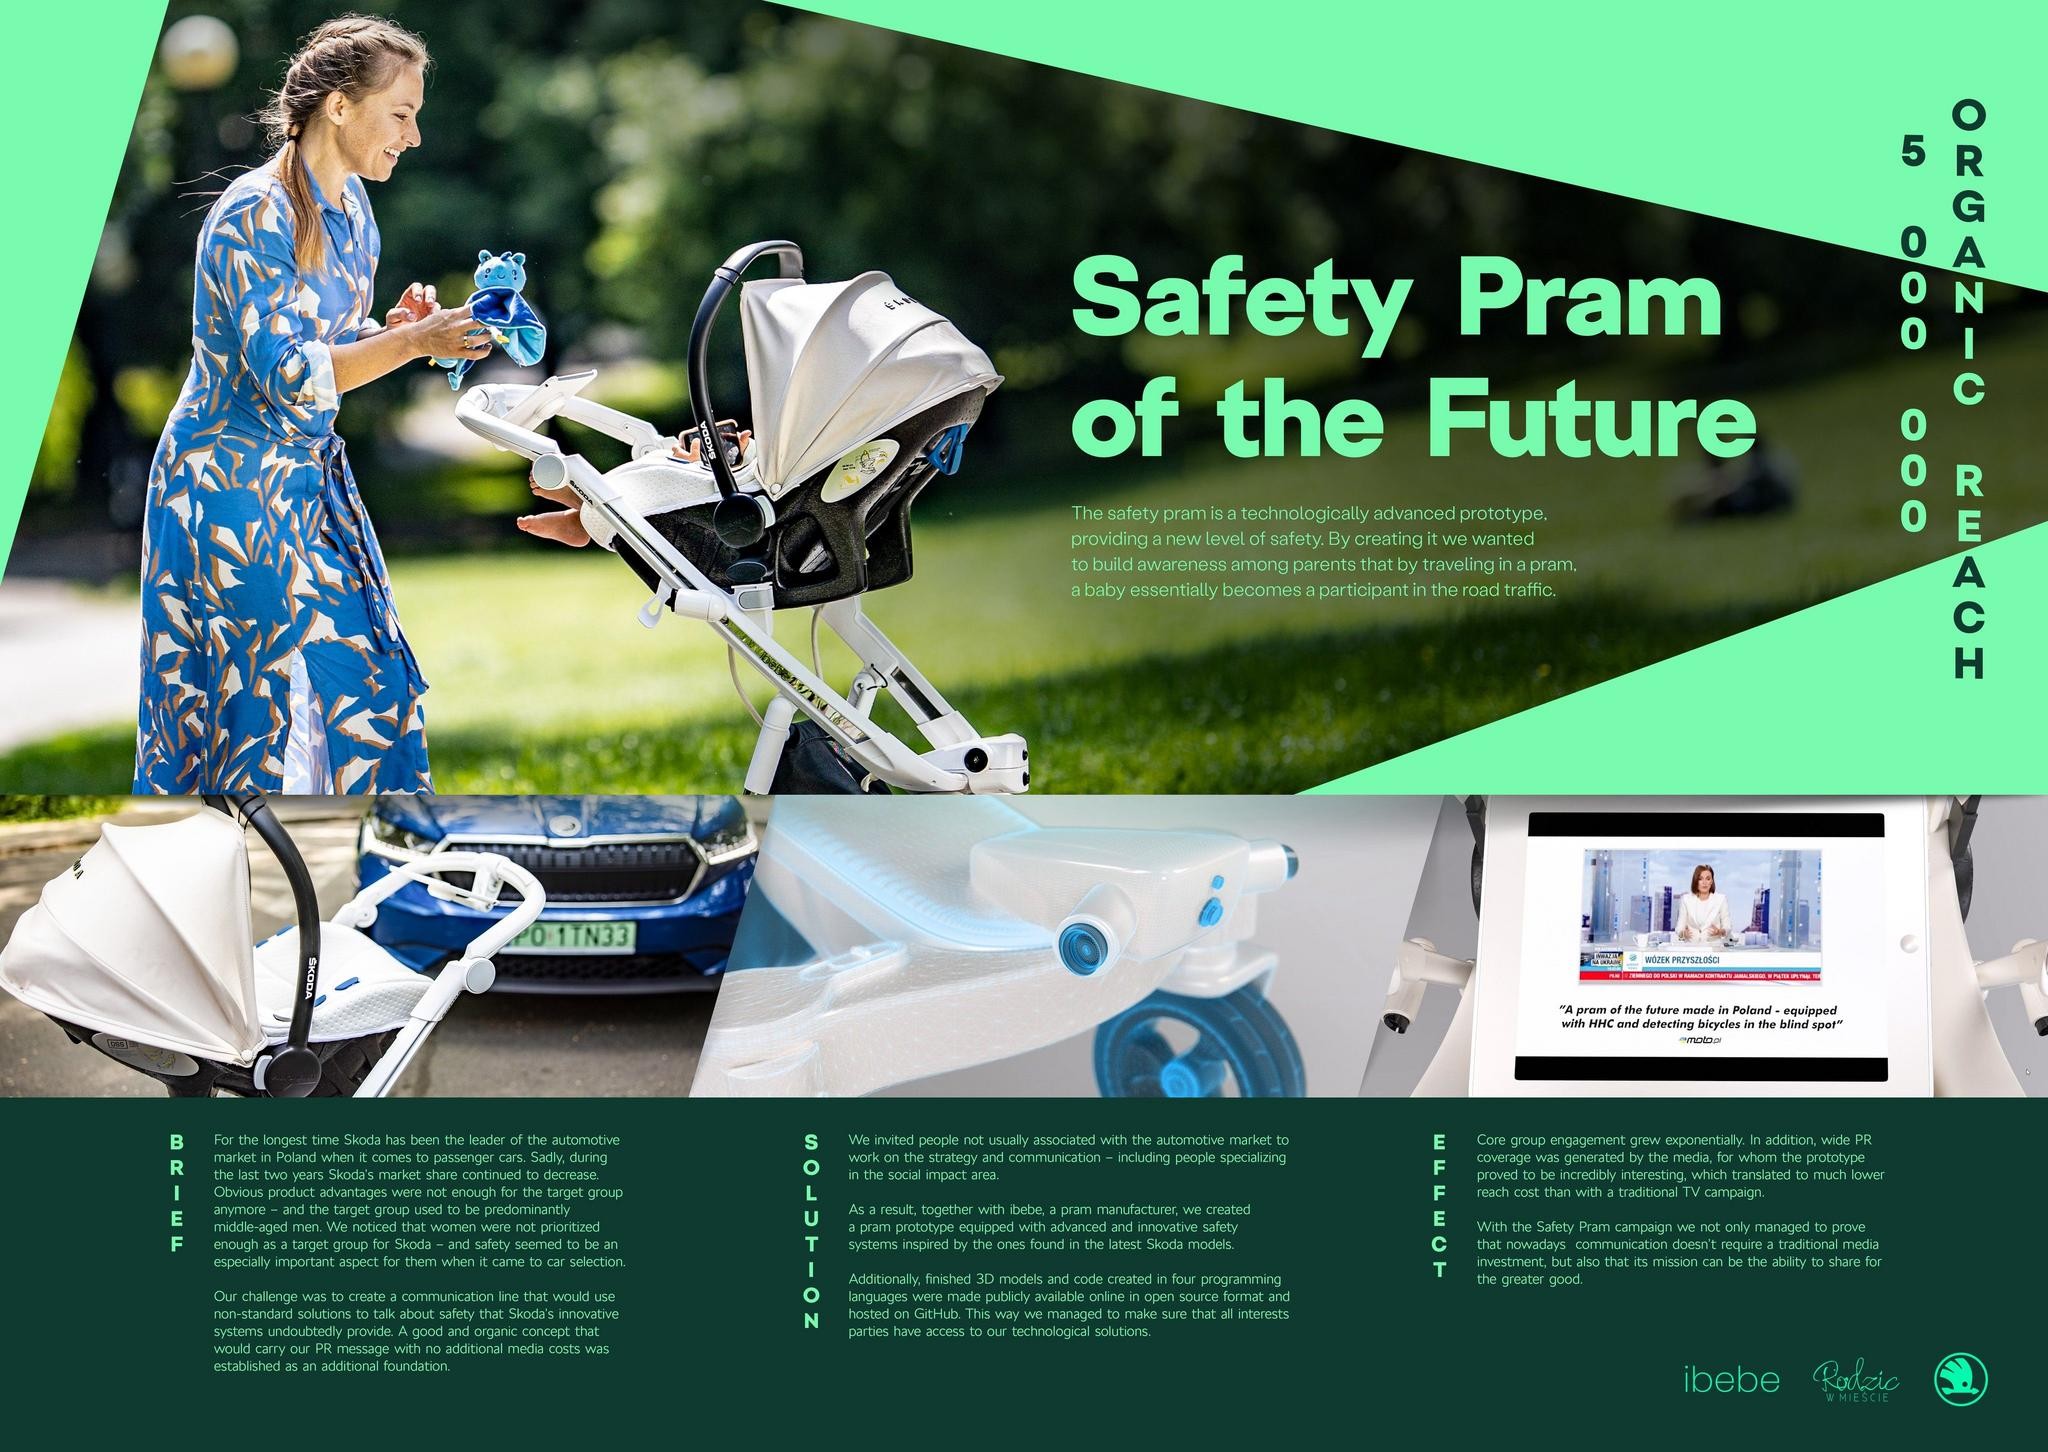 Safety Pram of the Future